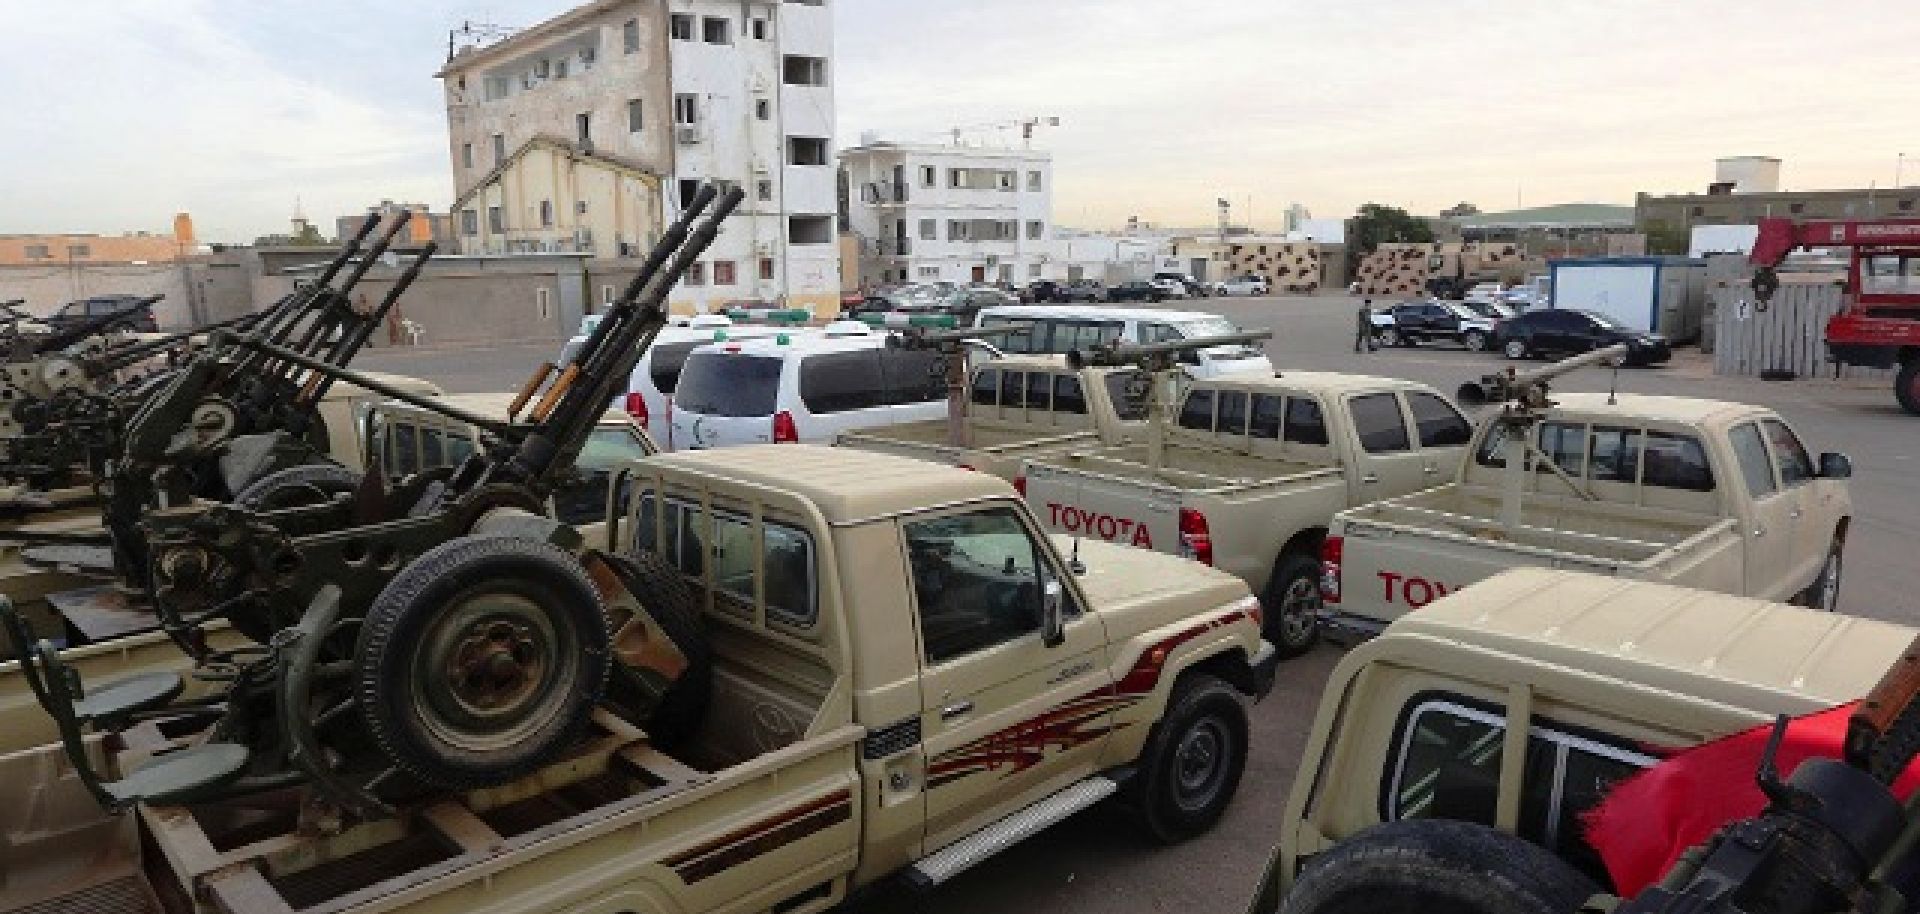  In Libya, a Retired General Makes a Move  Read more: In Libya, a Retired General Makes a Move